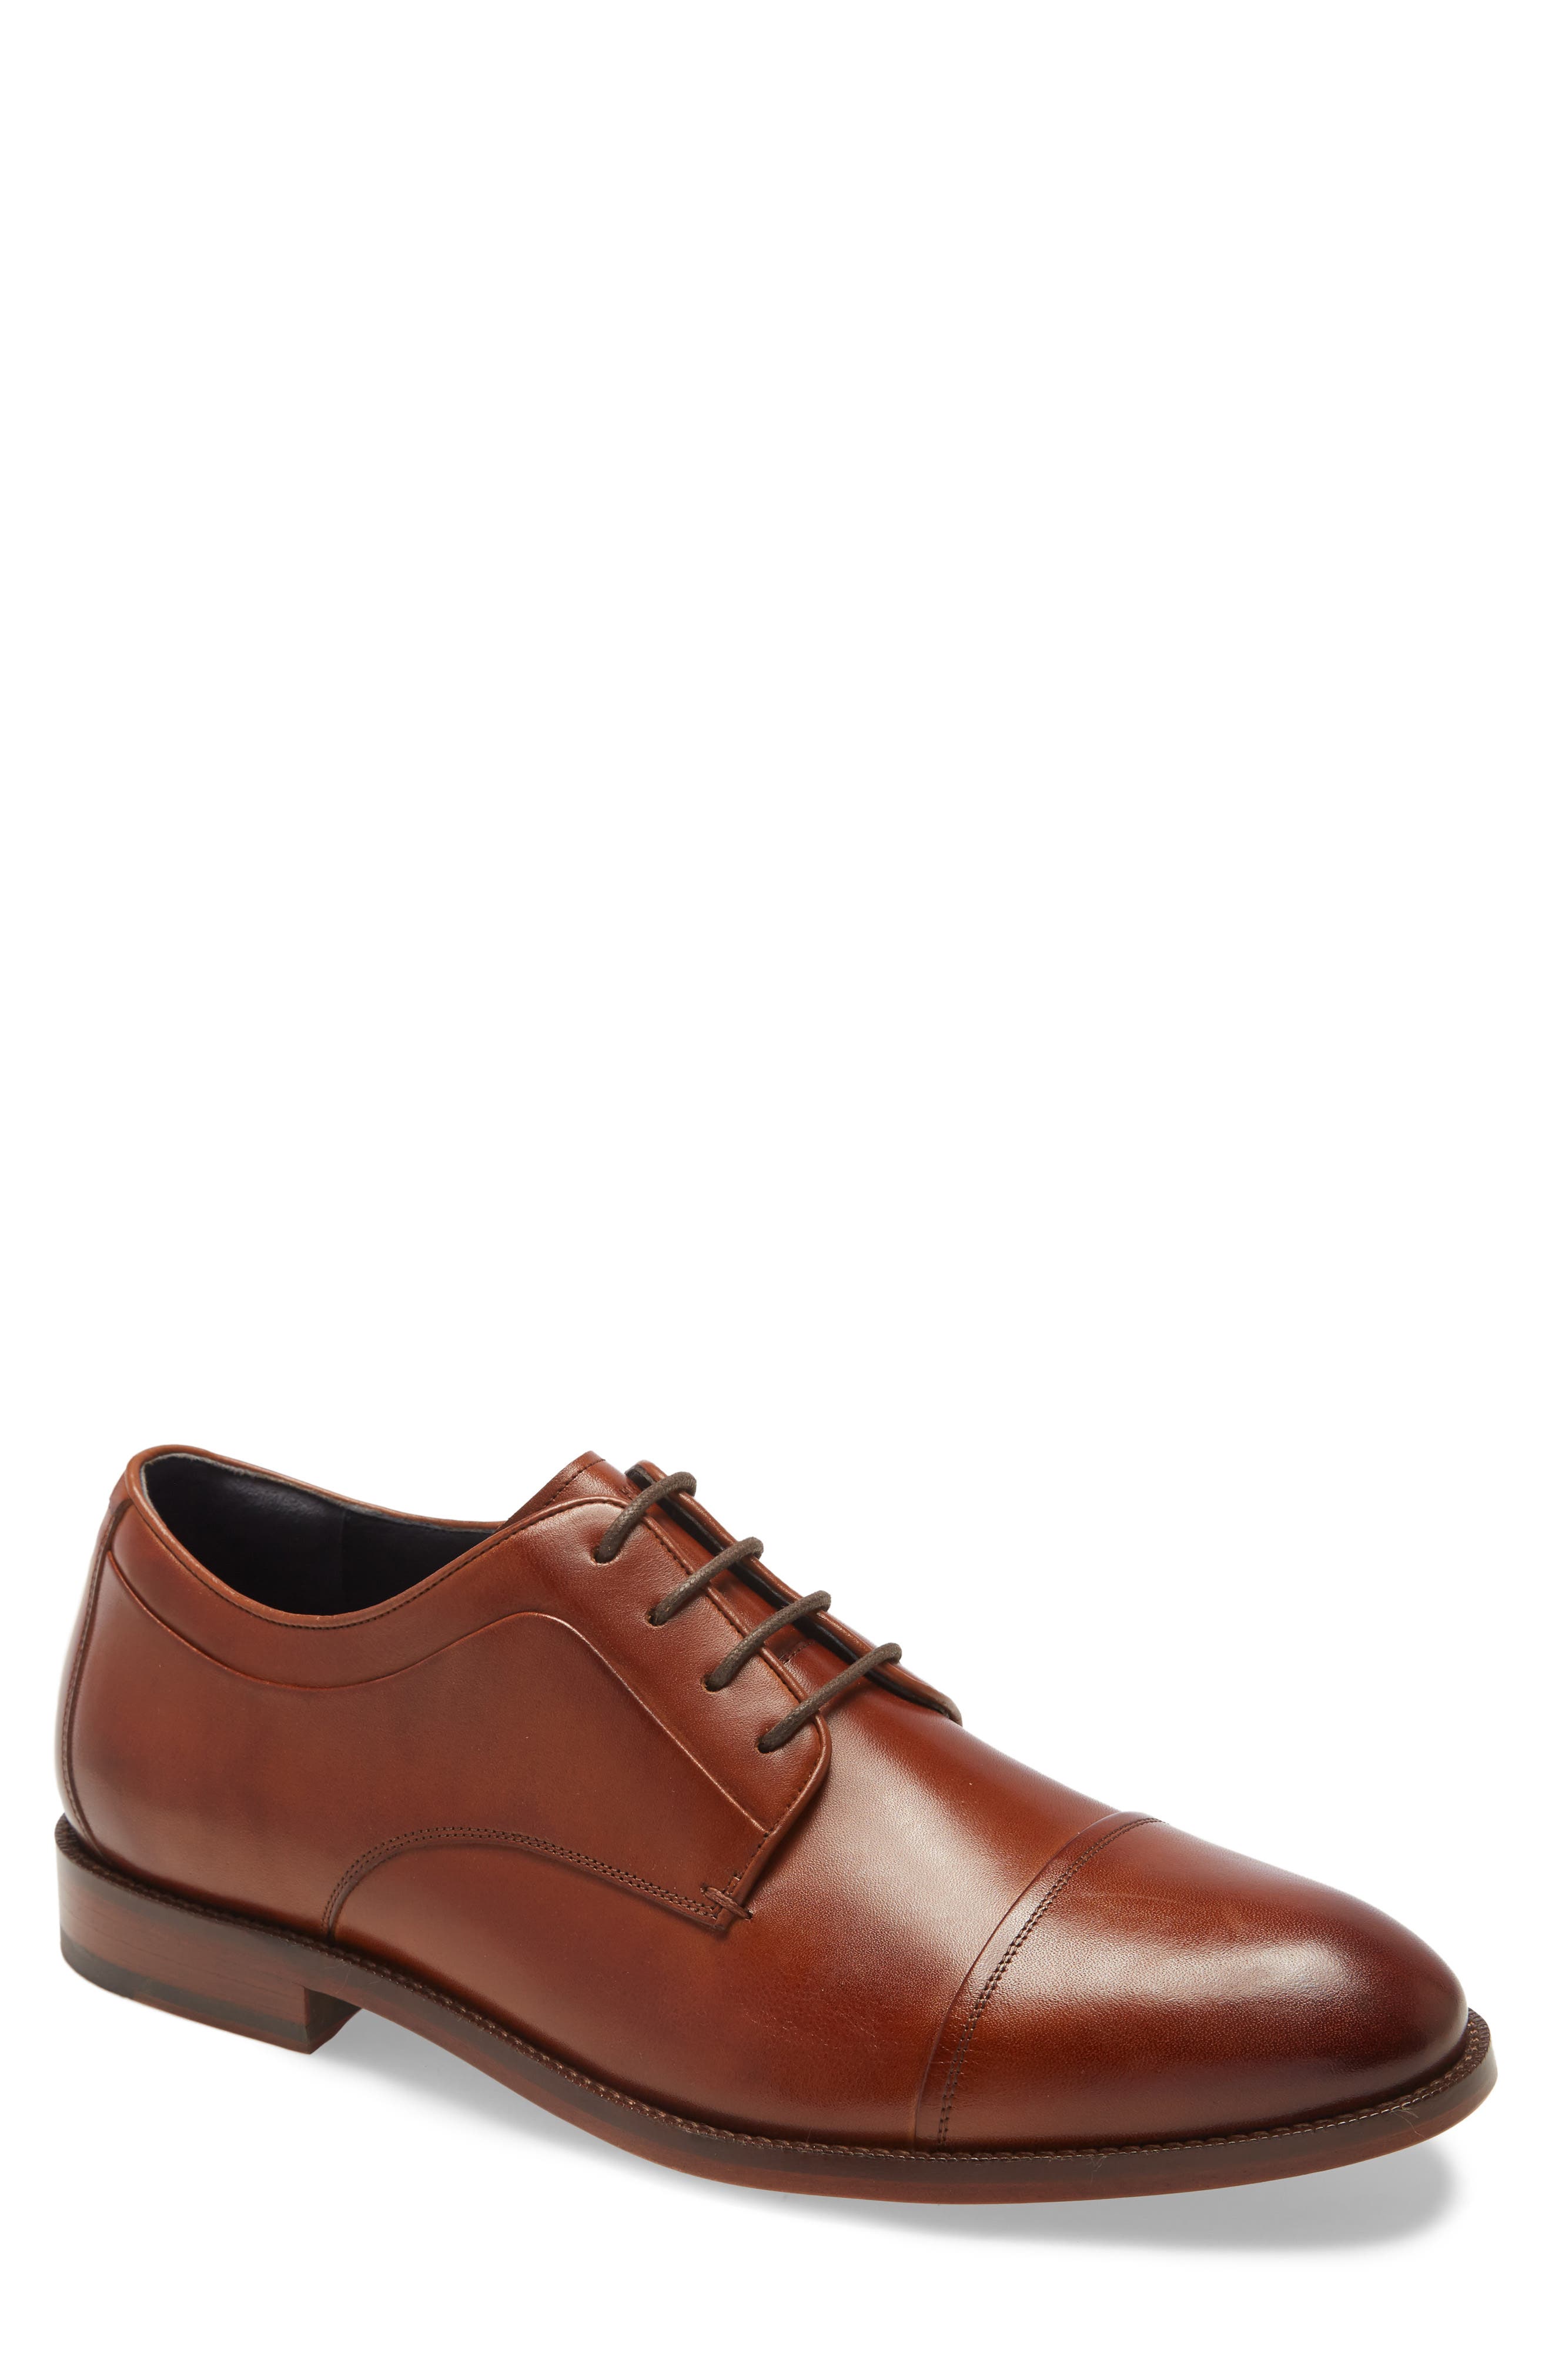 men’s brown leather dress shoes